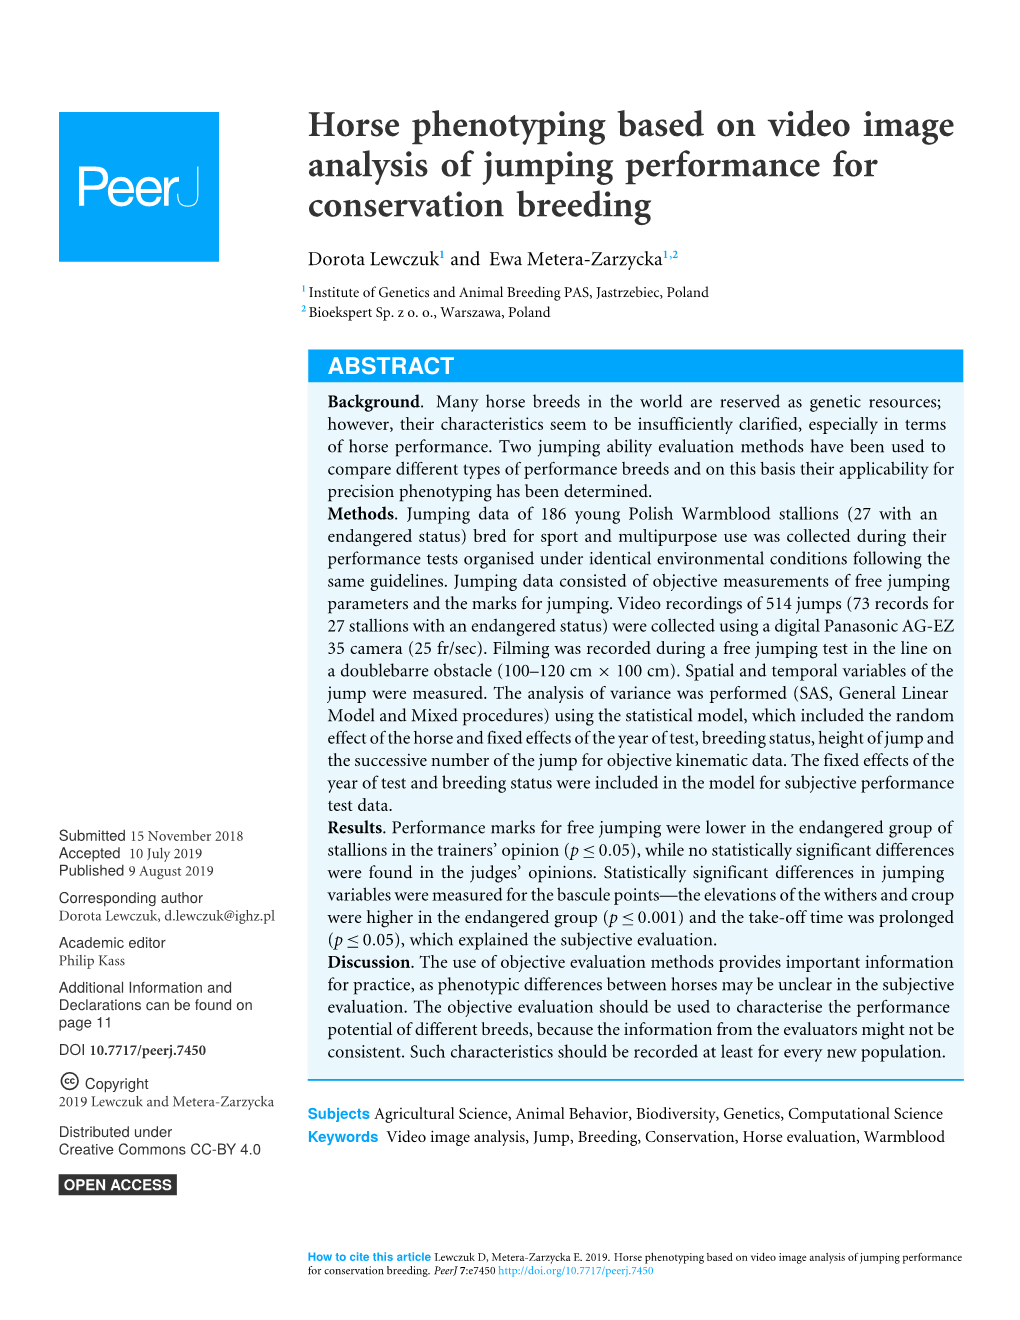 Horse Phenotyping Based on Video Image Analysis of Jumping Performance for Conservation Breeding